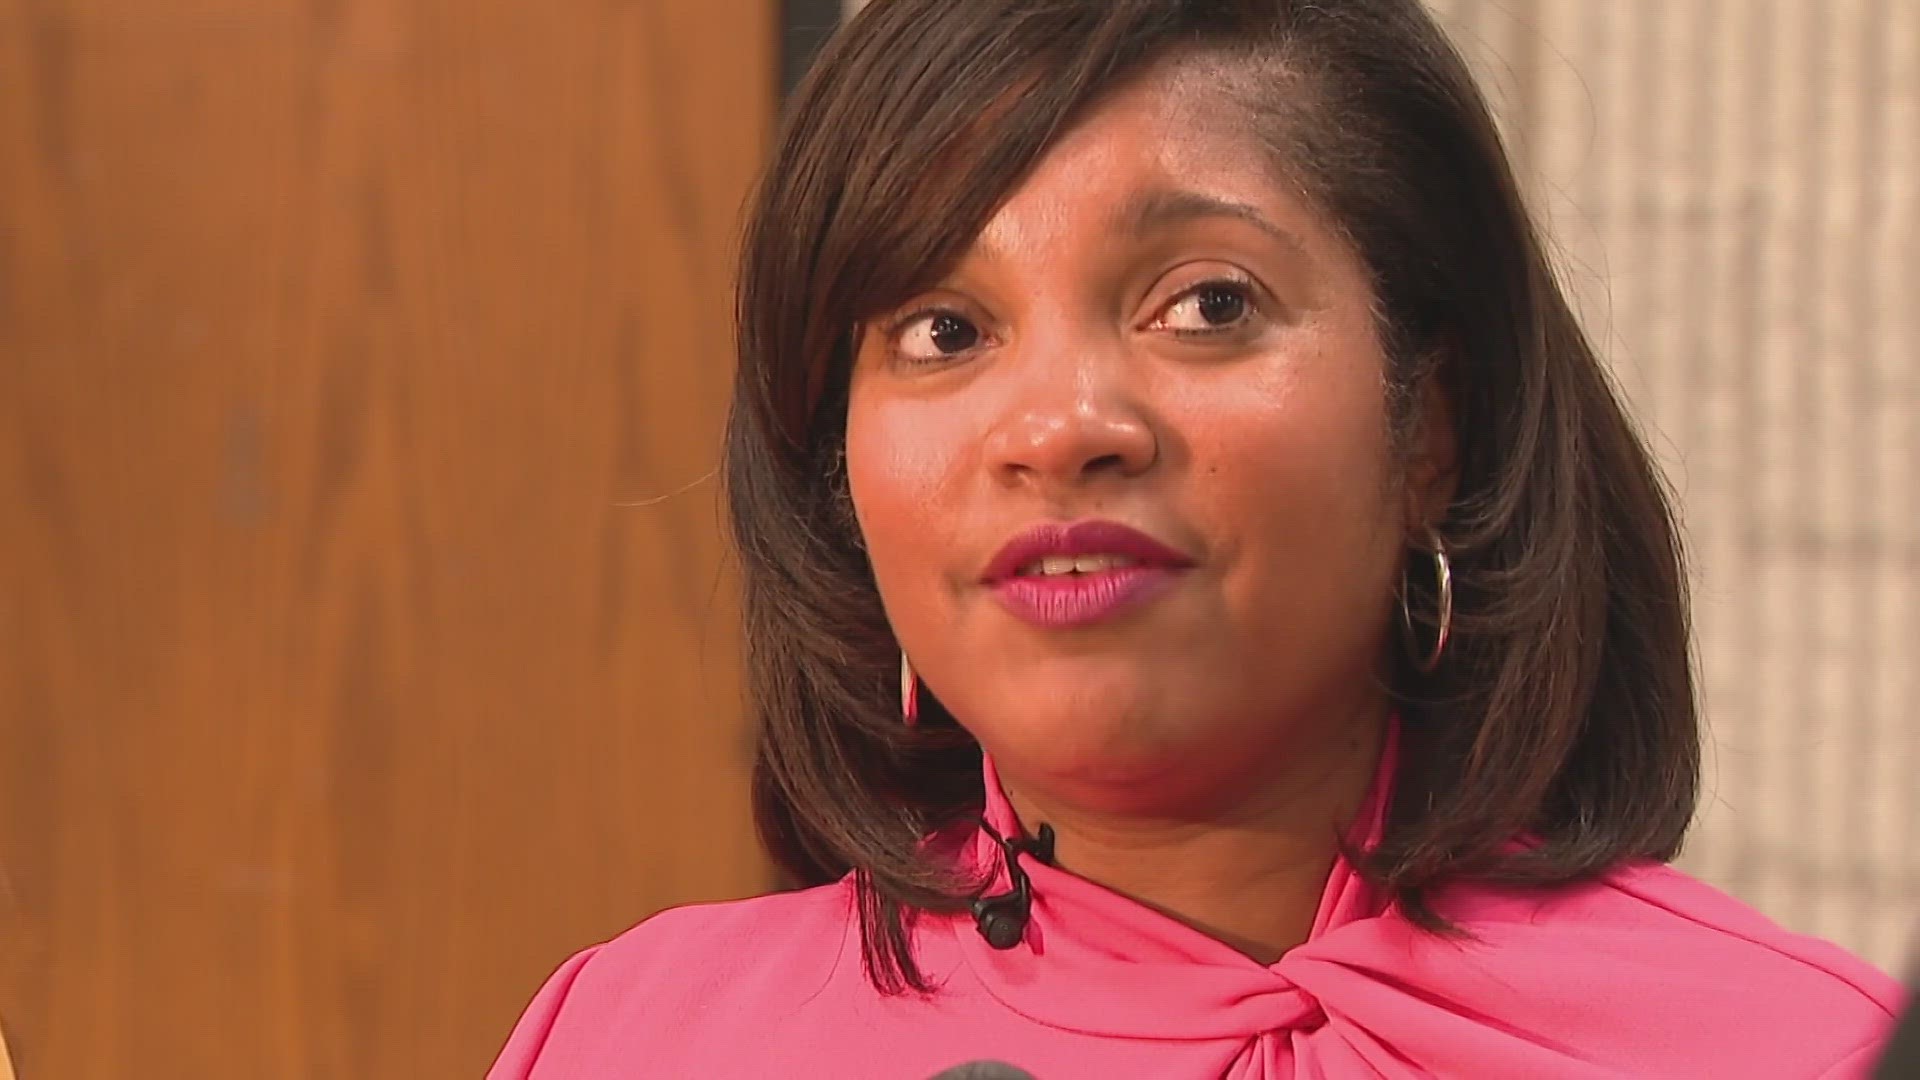 Chapman was previously the chief of transformation and leadership for Columbus City Schools. In January, she filled in as the interim superintendent.